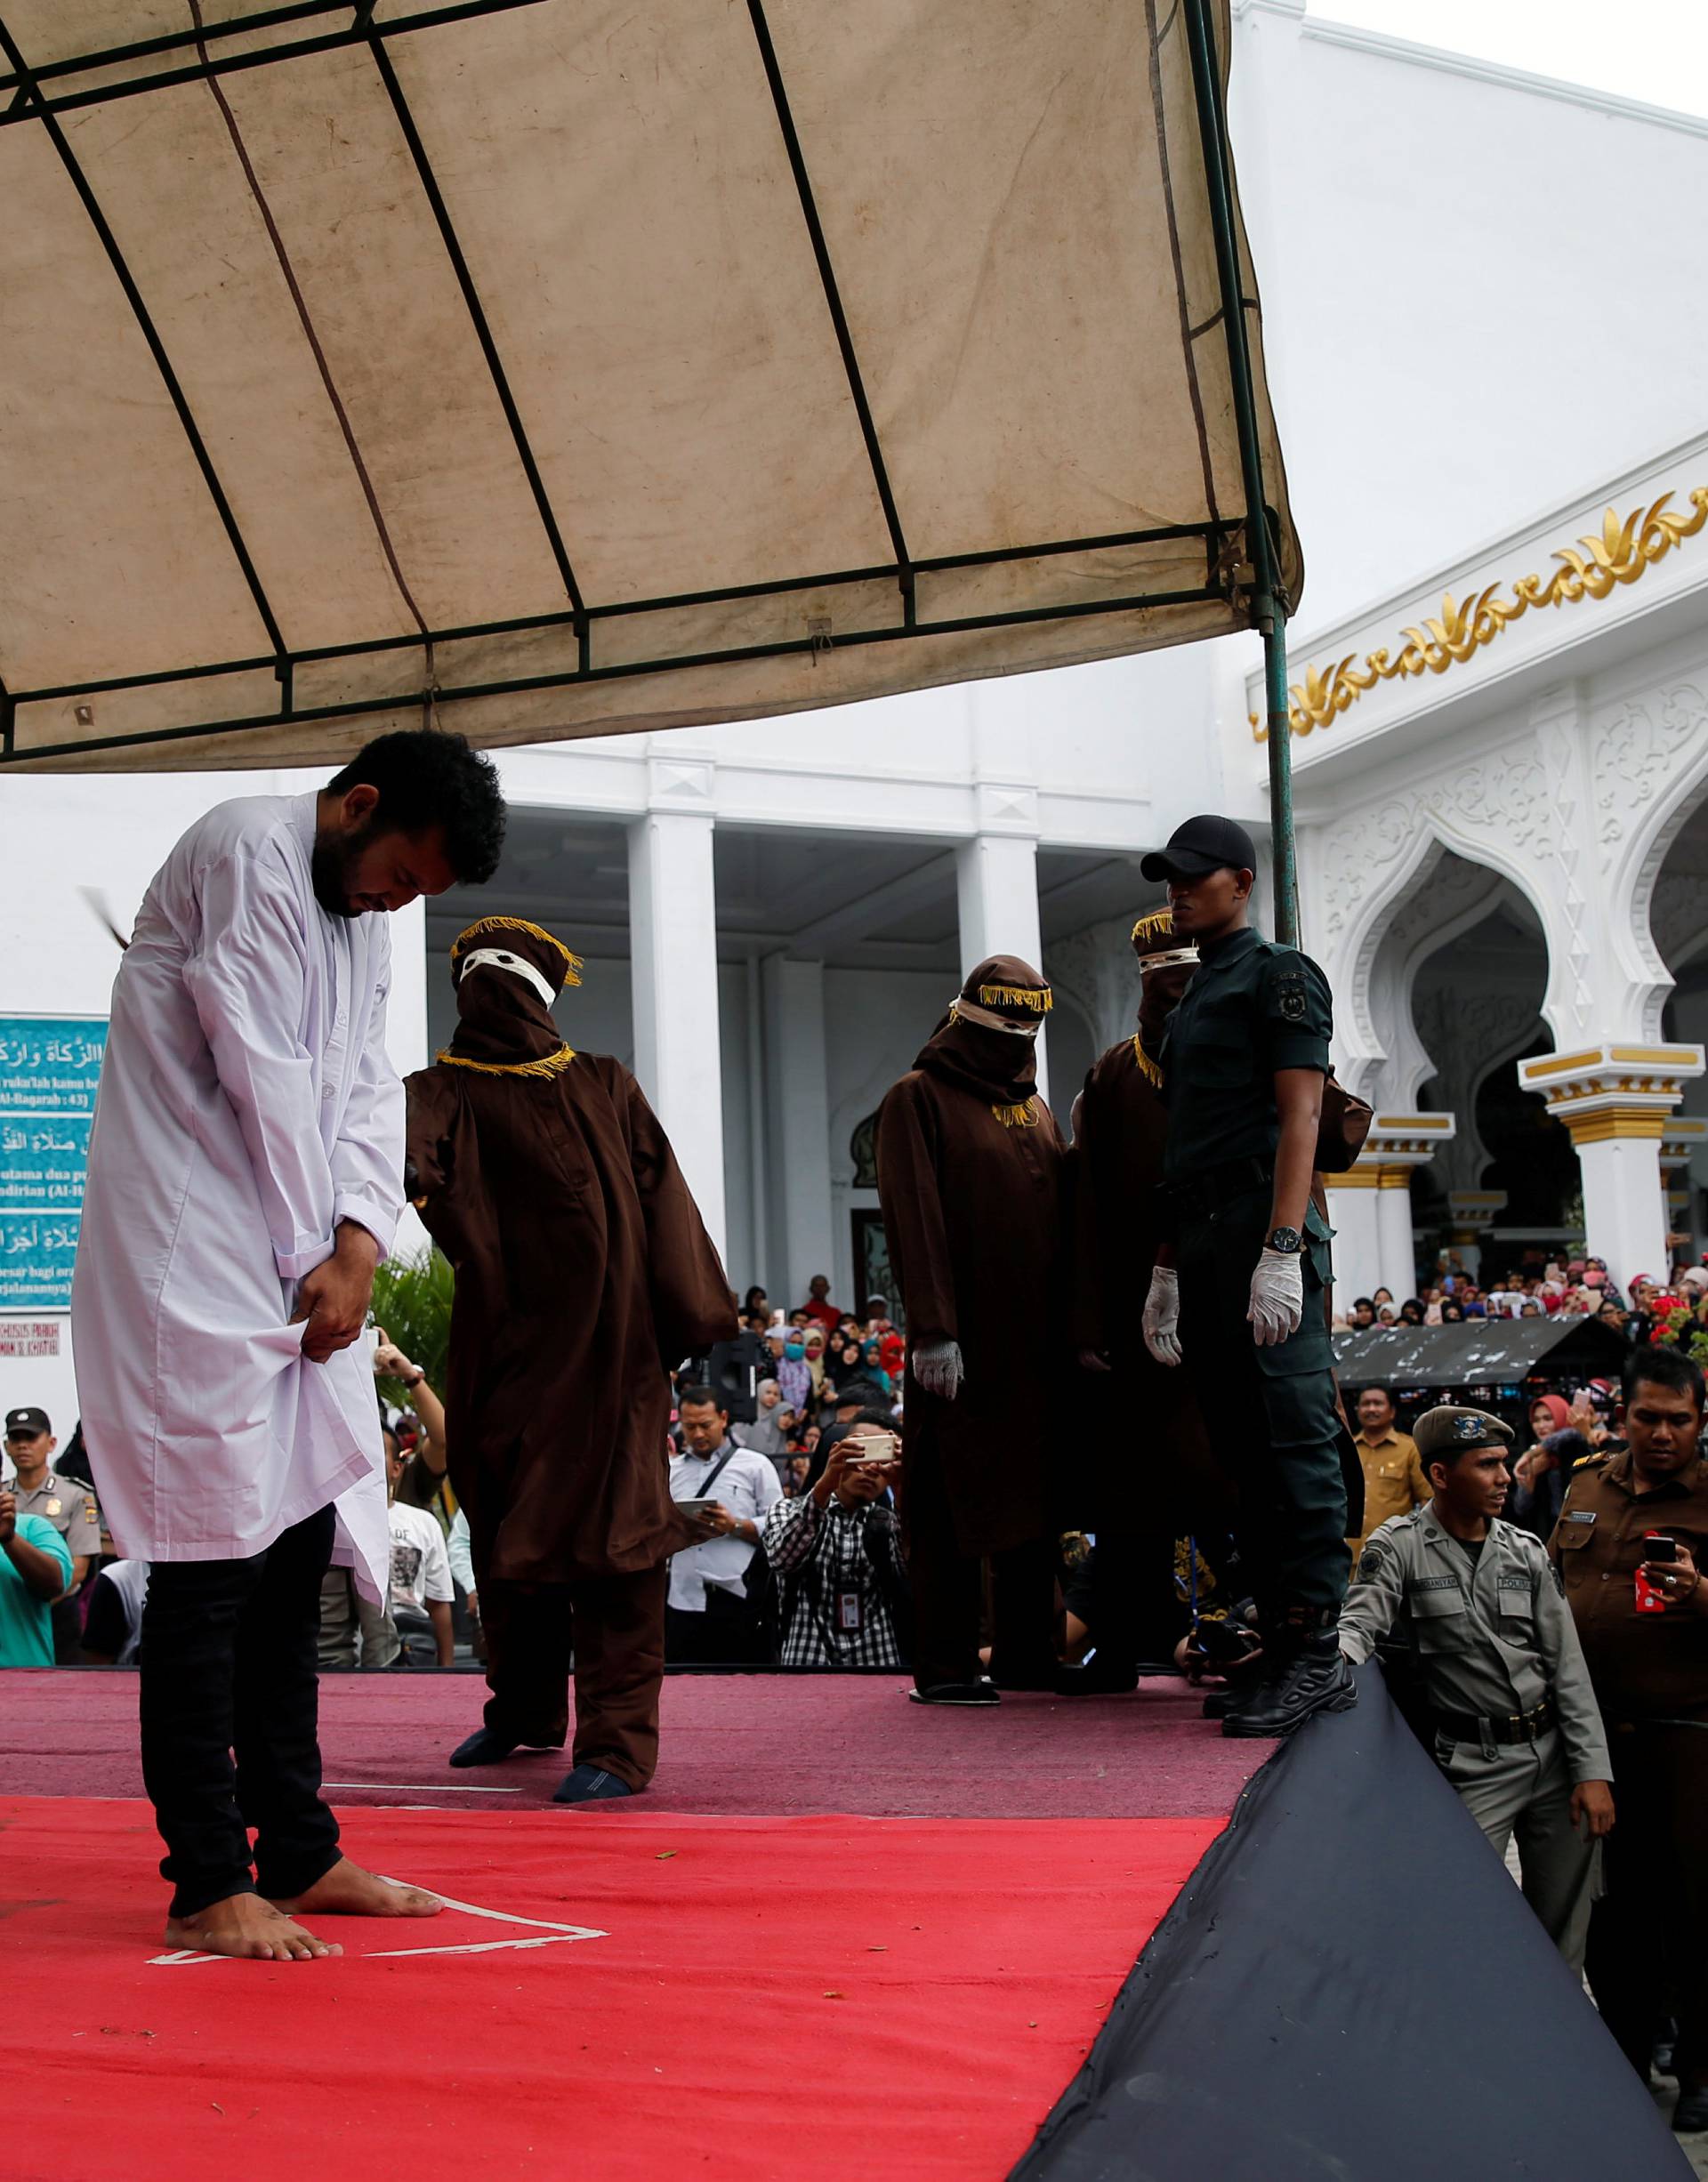 An Indonesian man is publicly caned for having gay sex, in Banda Aceh